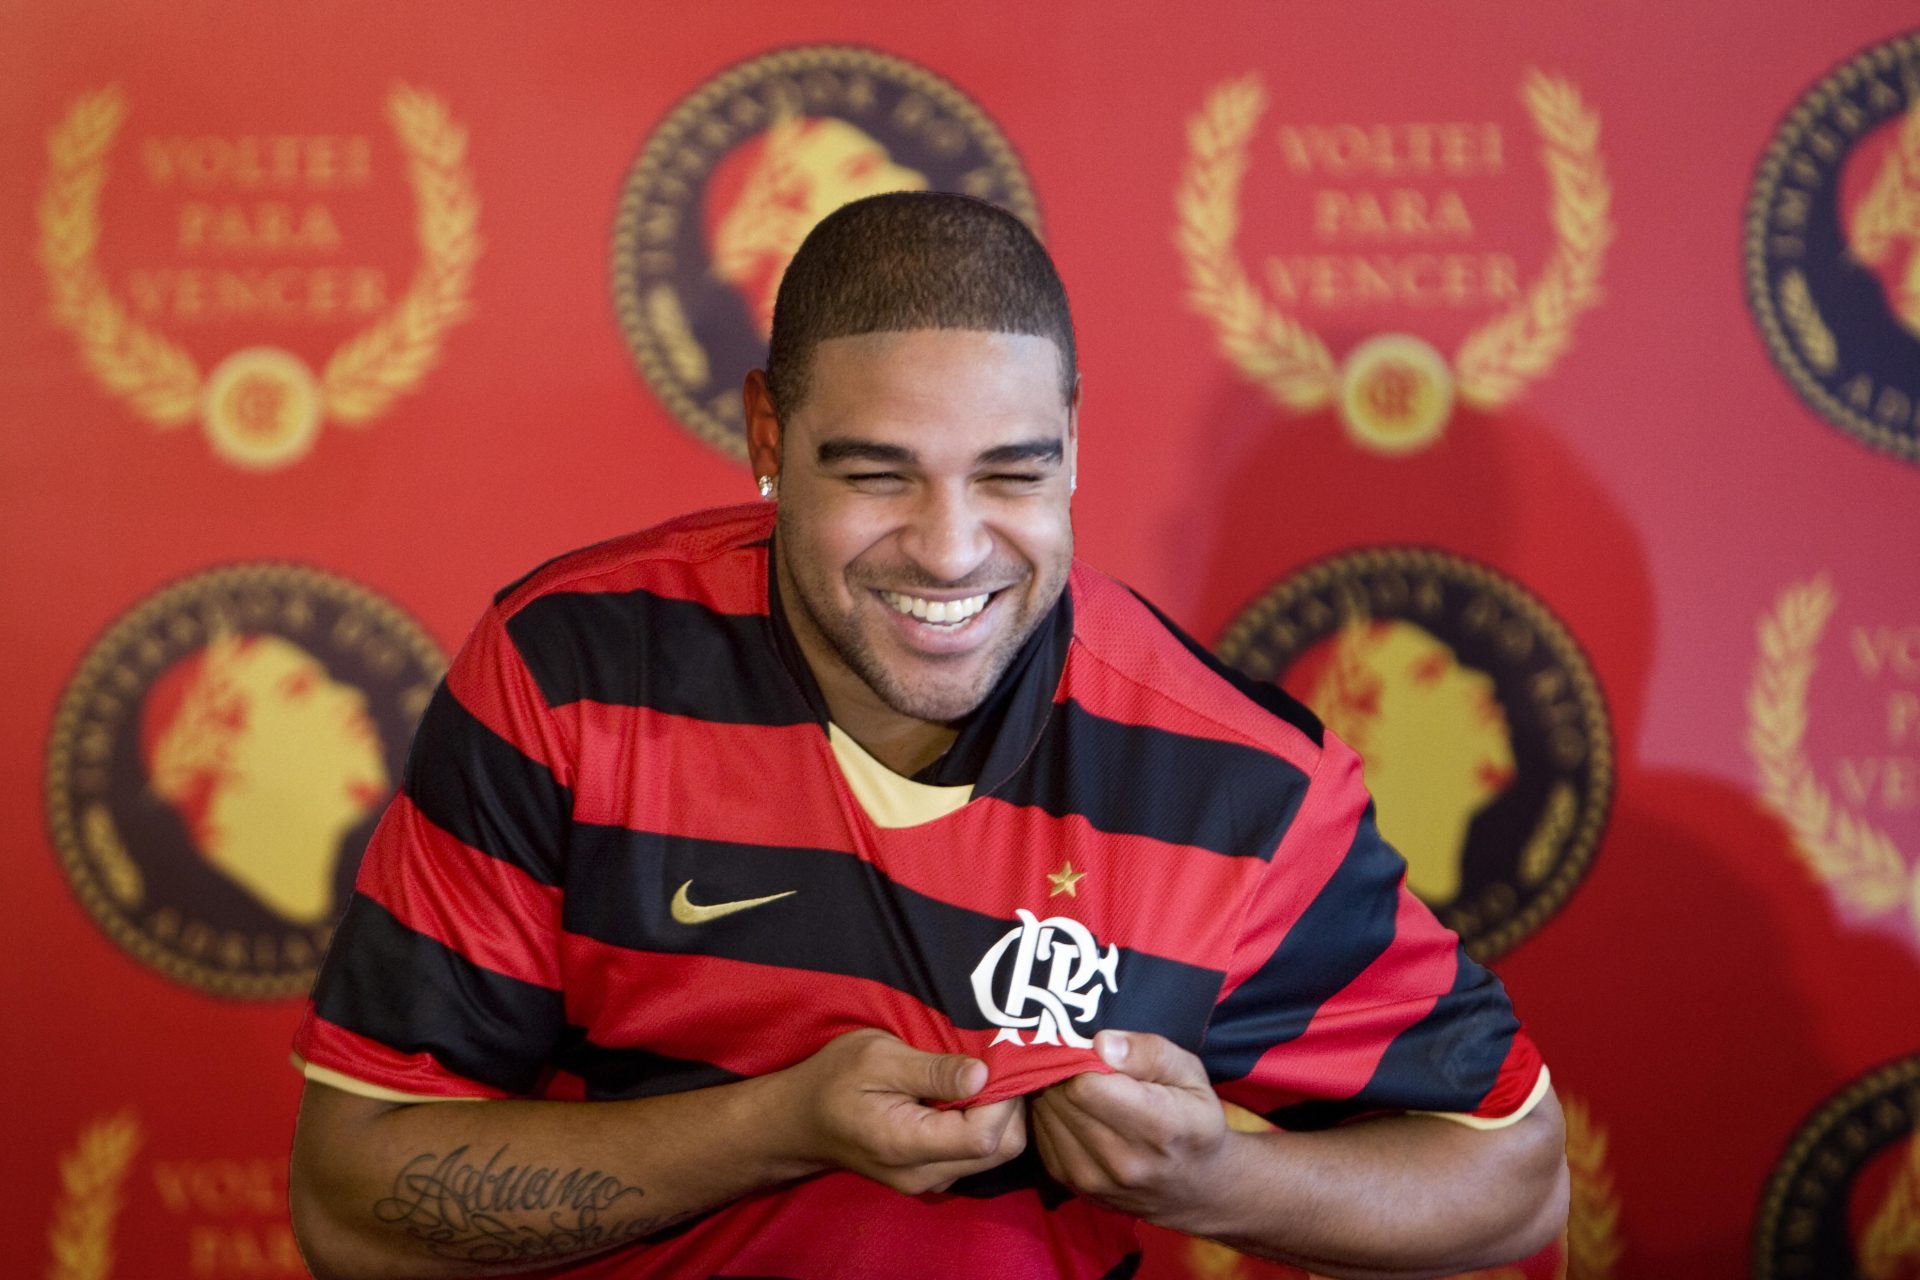 <p><span>After leaving Inter Milan, Adriano returned to Flamengo and flourished again, scoring 34 goals in 51 games. But his return to Brazil was also accompanied by serious personal problems.</span></p>